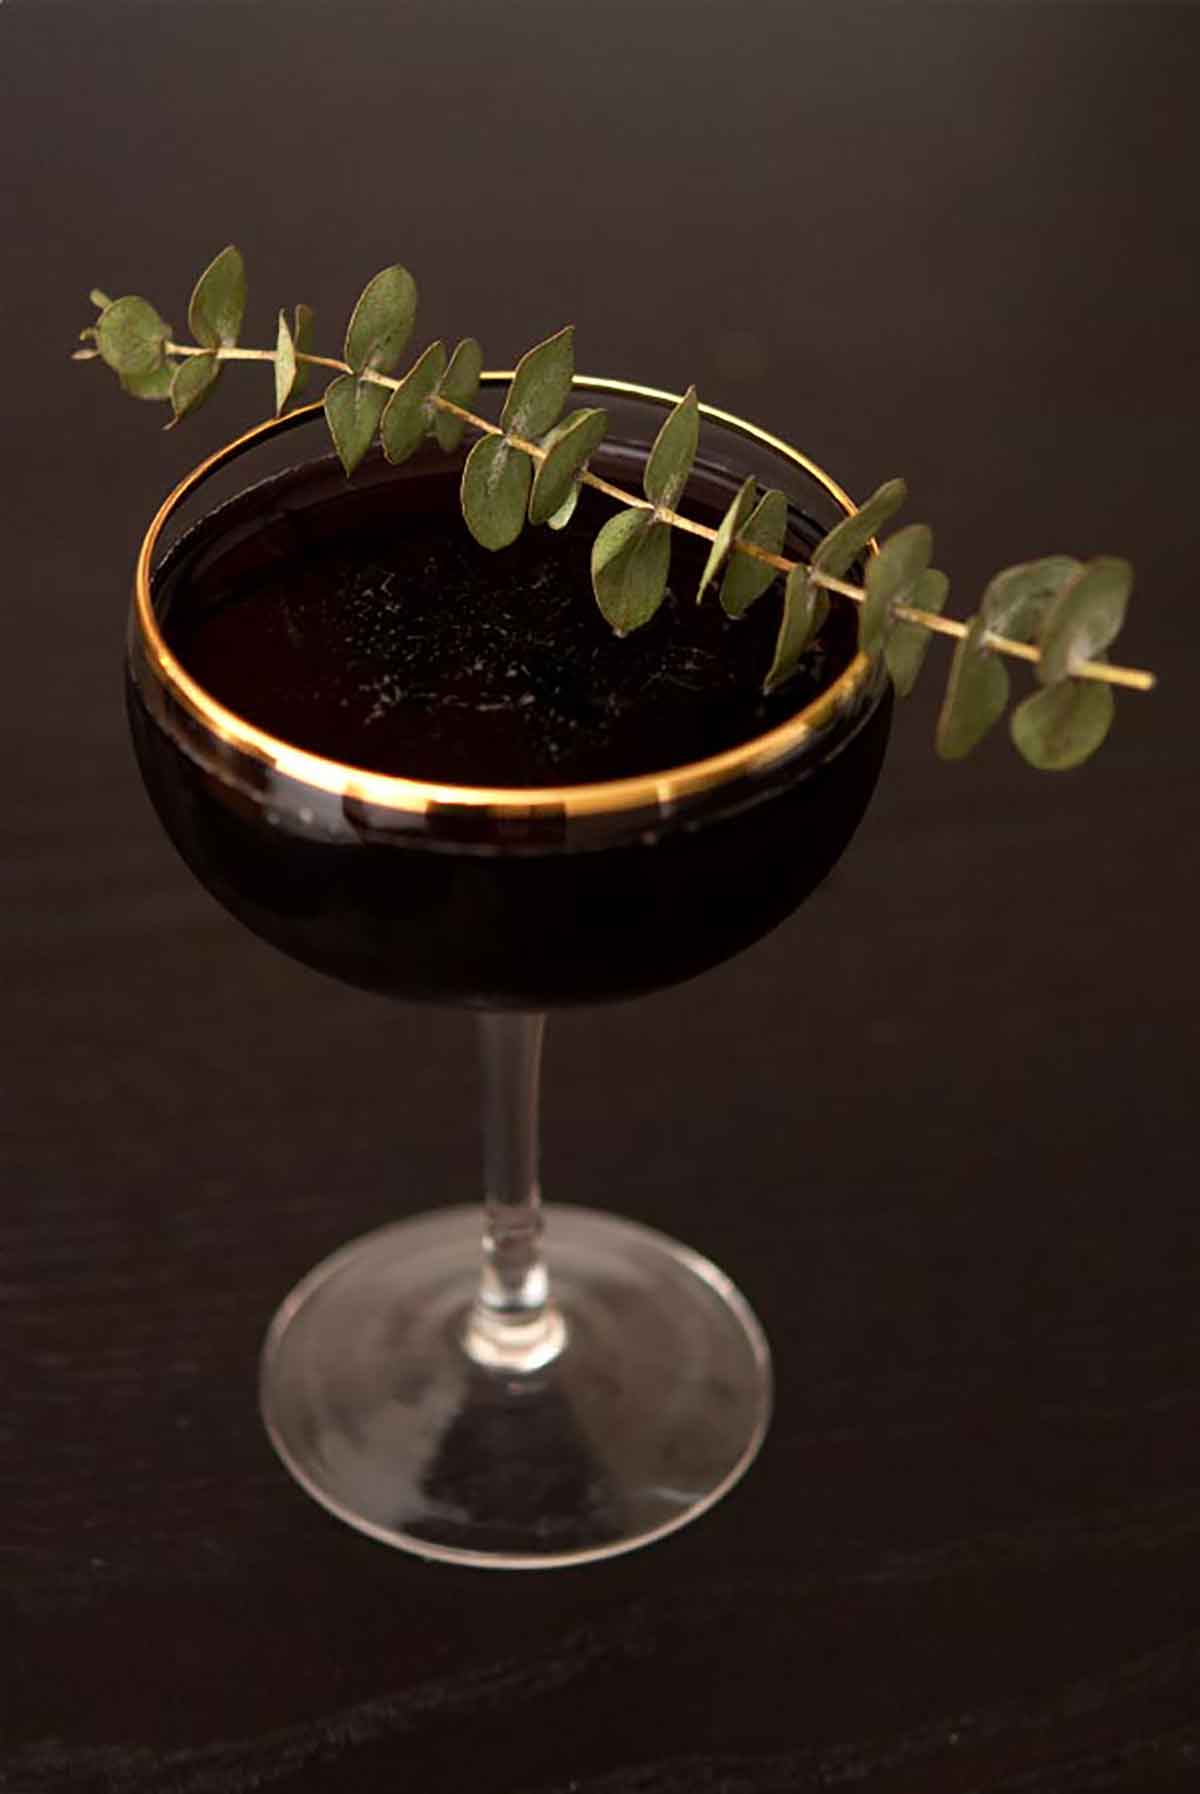 A black cocktail in a glass rimmed glass, garnished with eucalyptus.